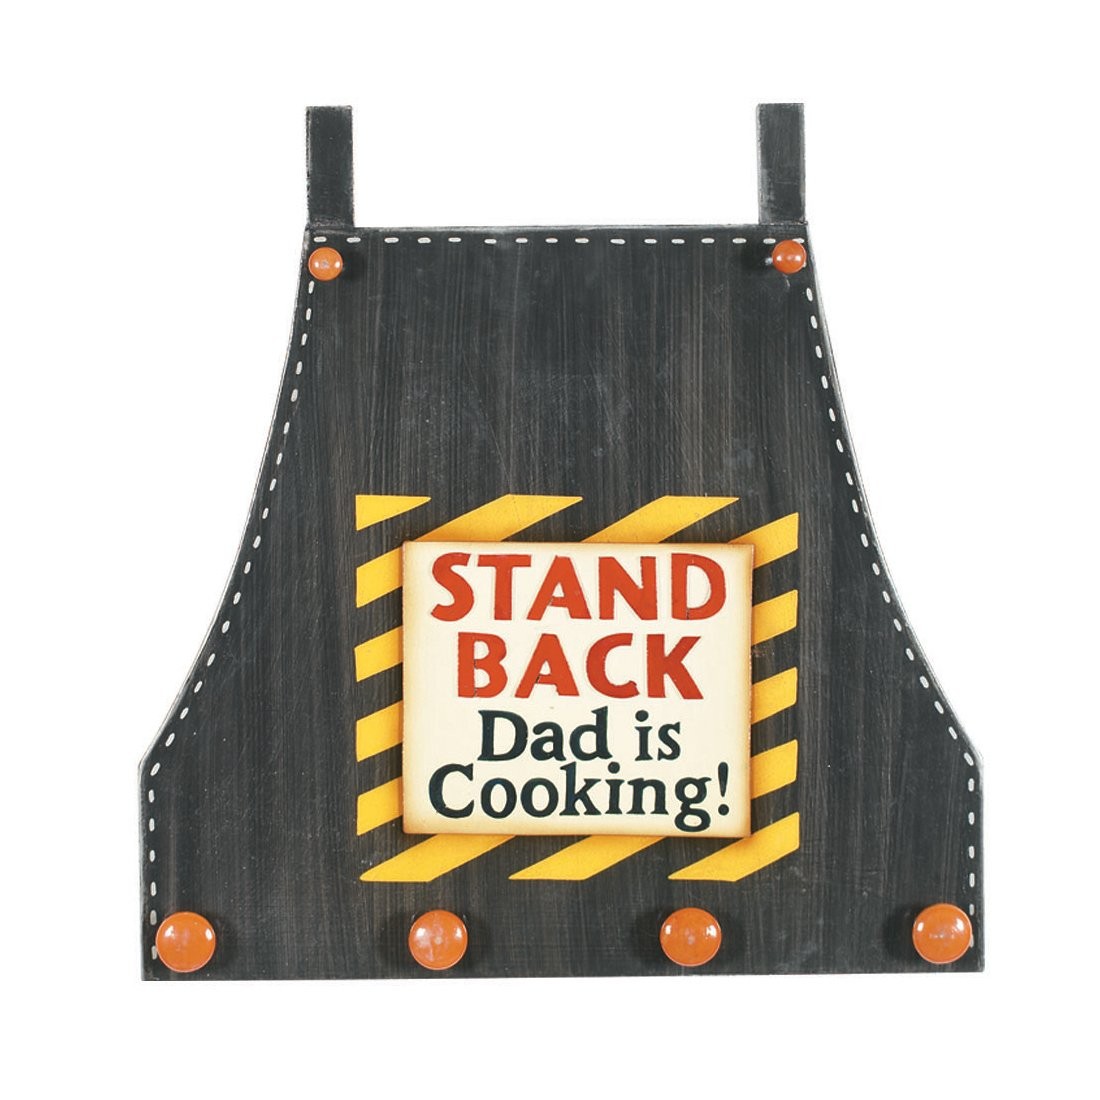 STAND BACK -DAD IS COOKING